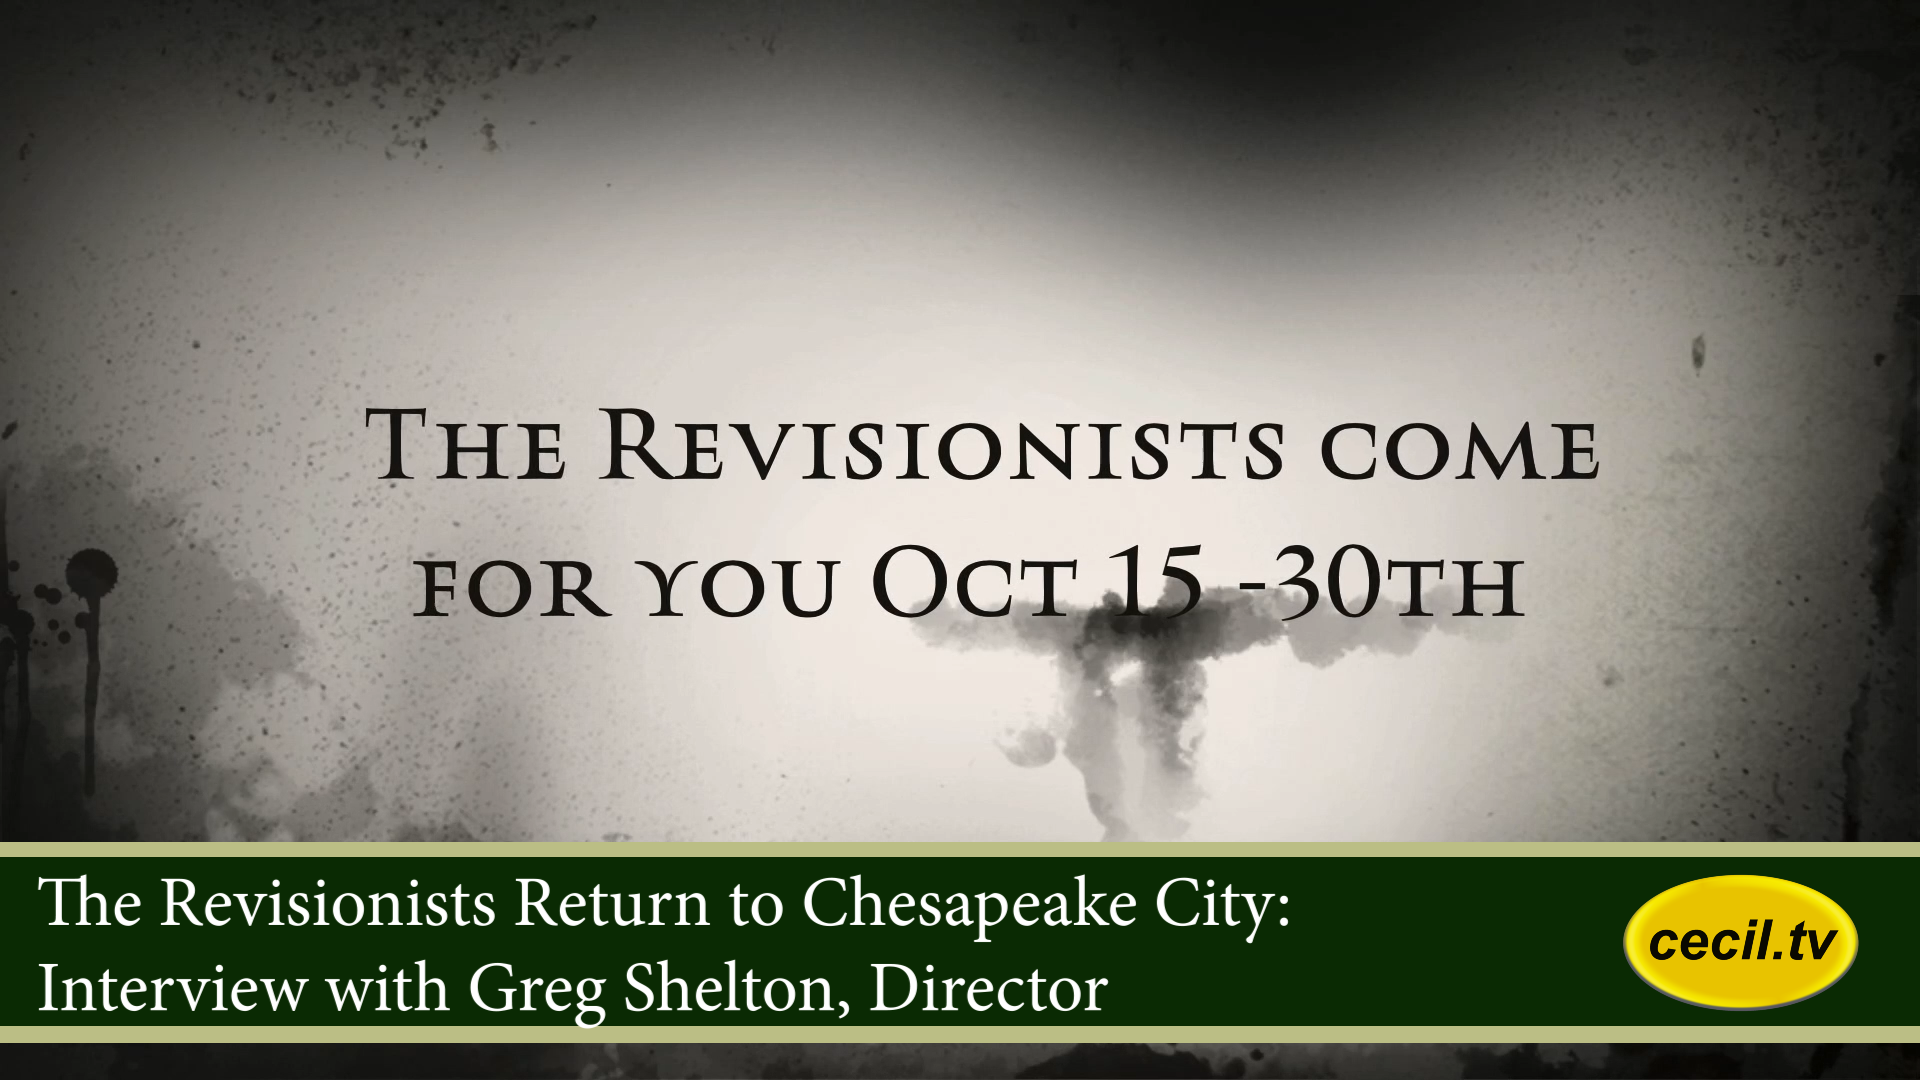 Revisionists 2021 Comes to Chesapeake City